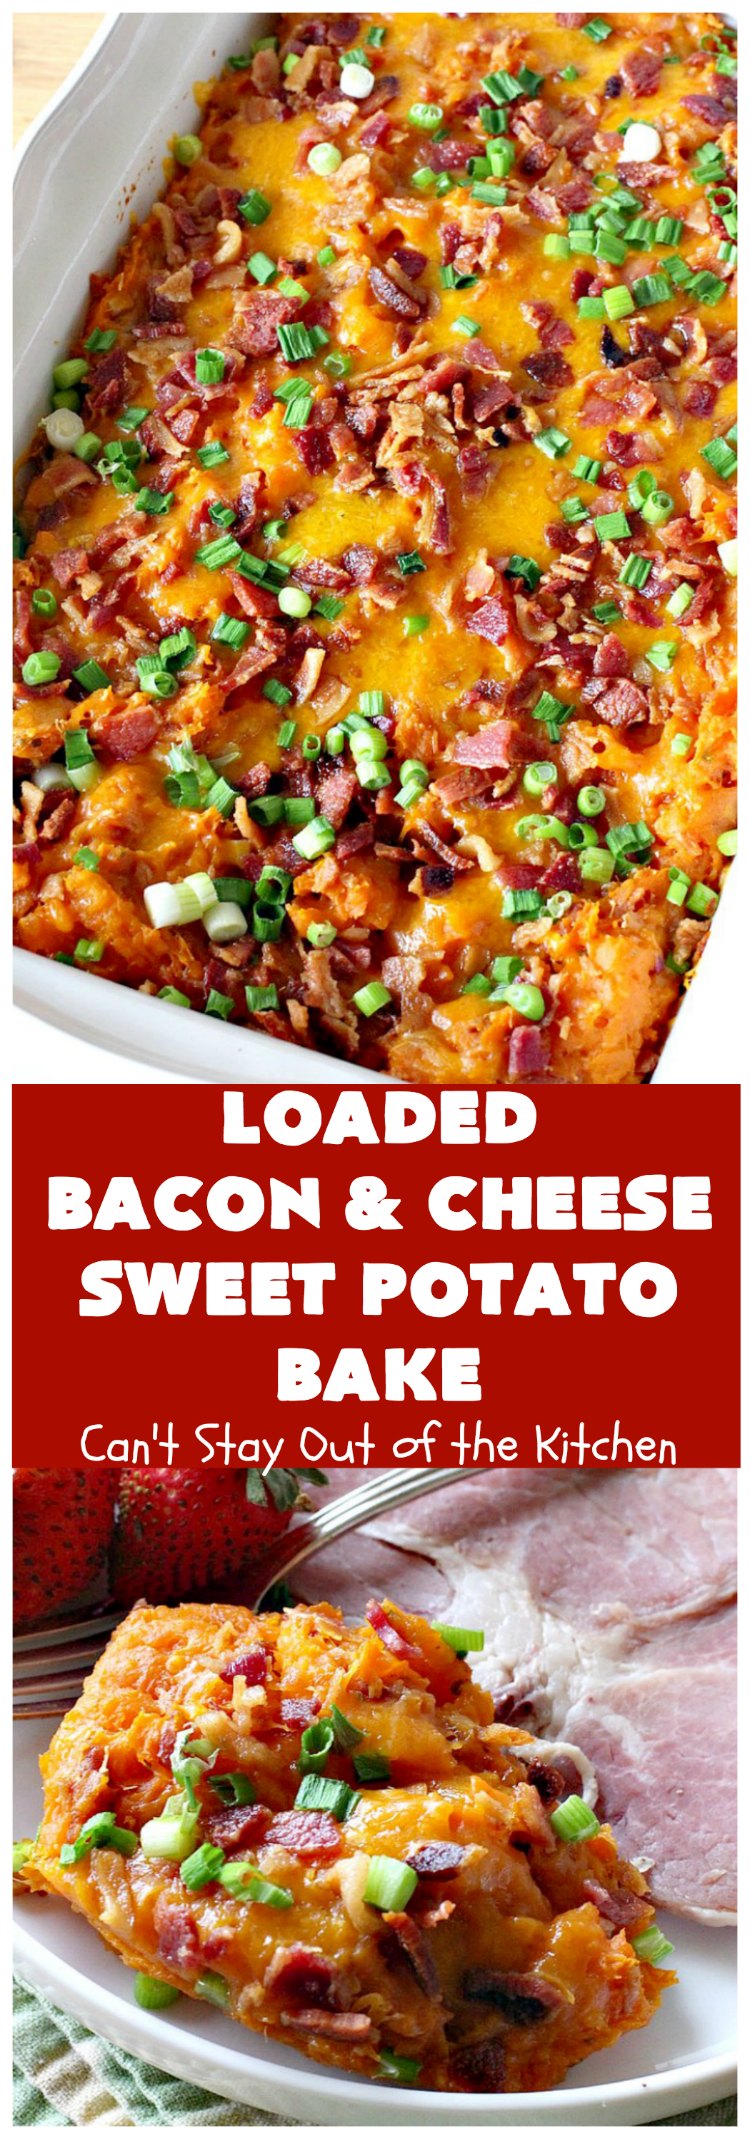 Loaded Bacon and Cheese Sweet Potato Bake | Can't Stay Out of the Kitchen